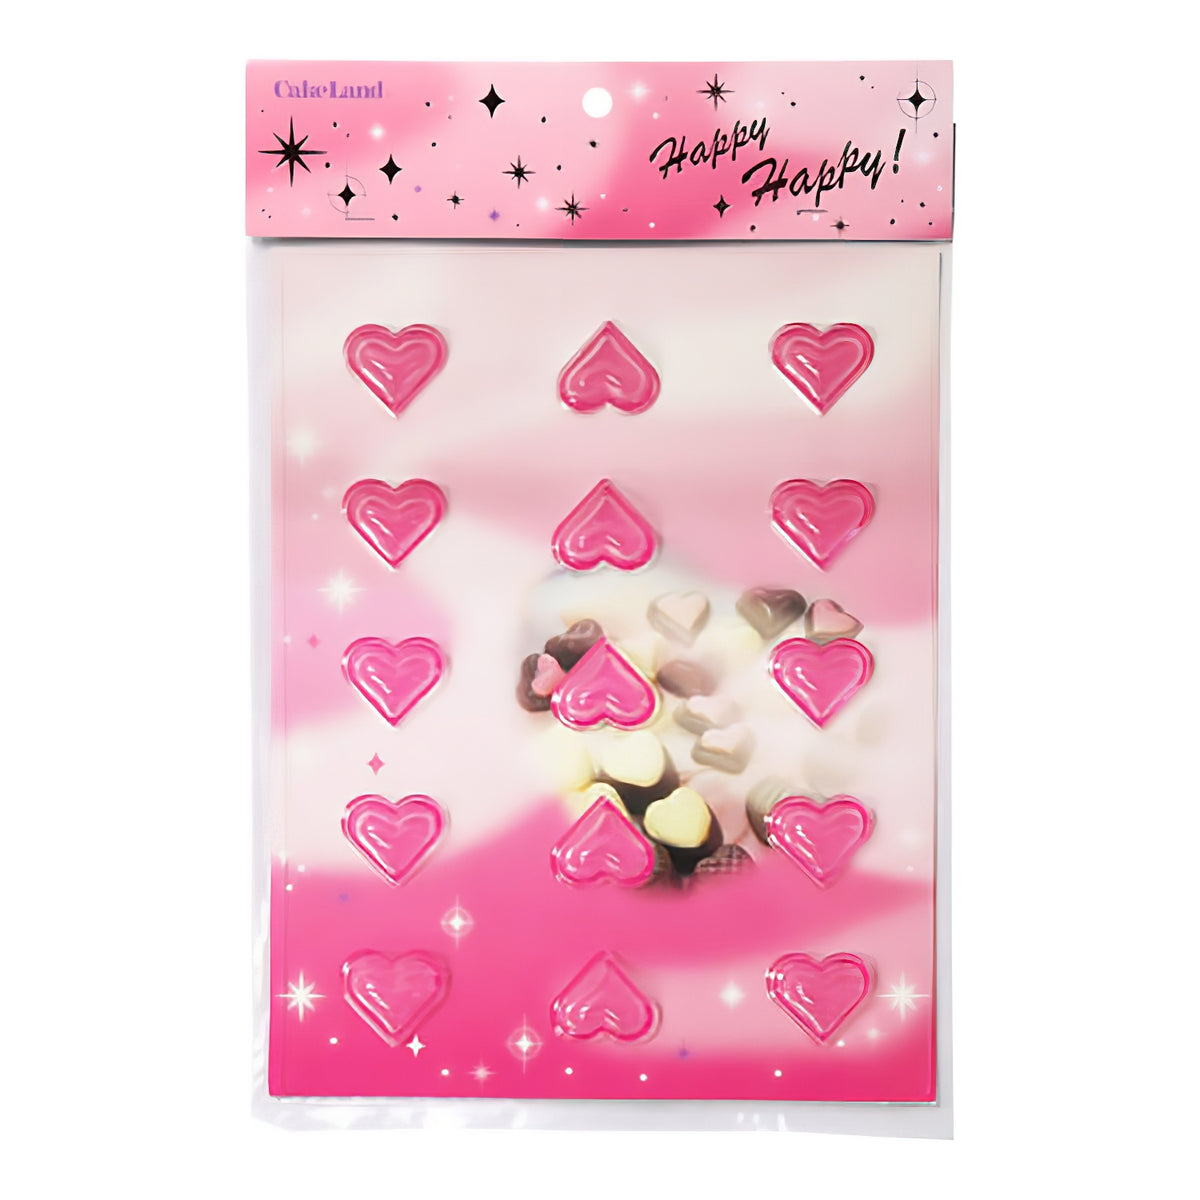 TIGERCROWN Polystyrene Heart Lolly Chocolate Mold - Globalkitchen